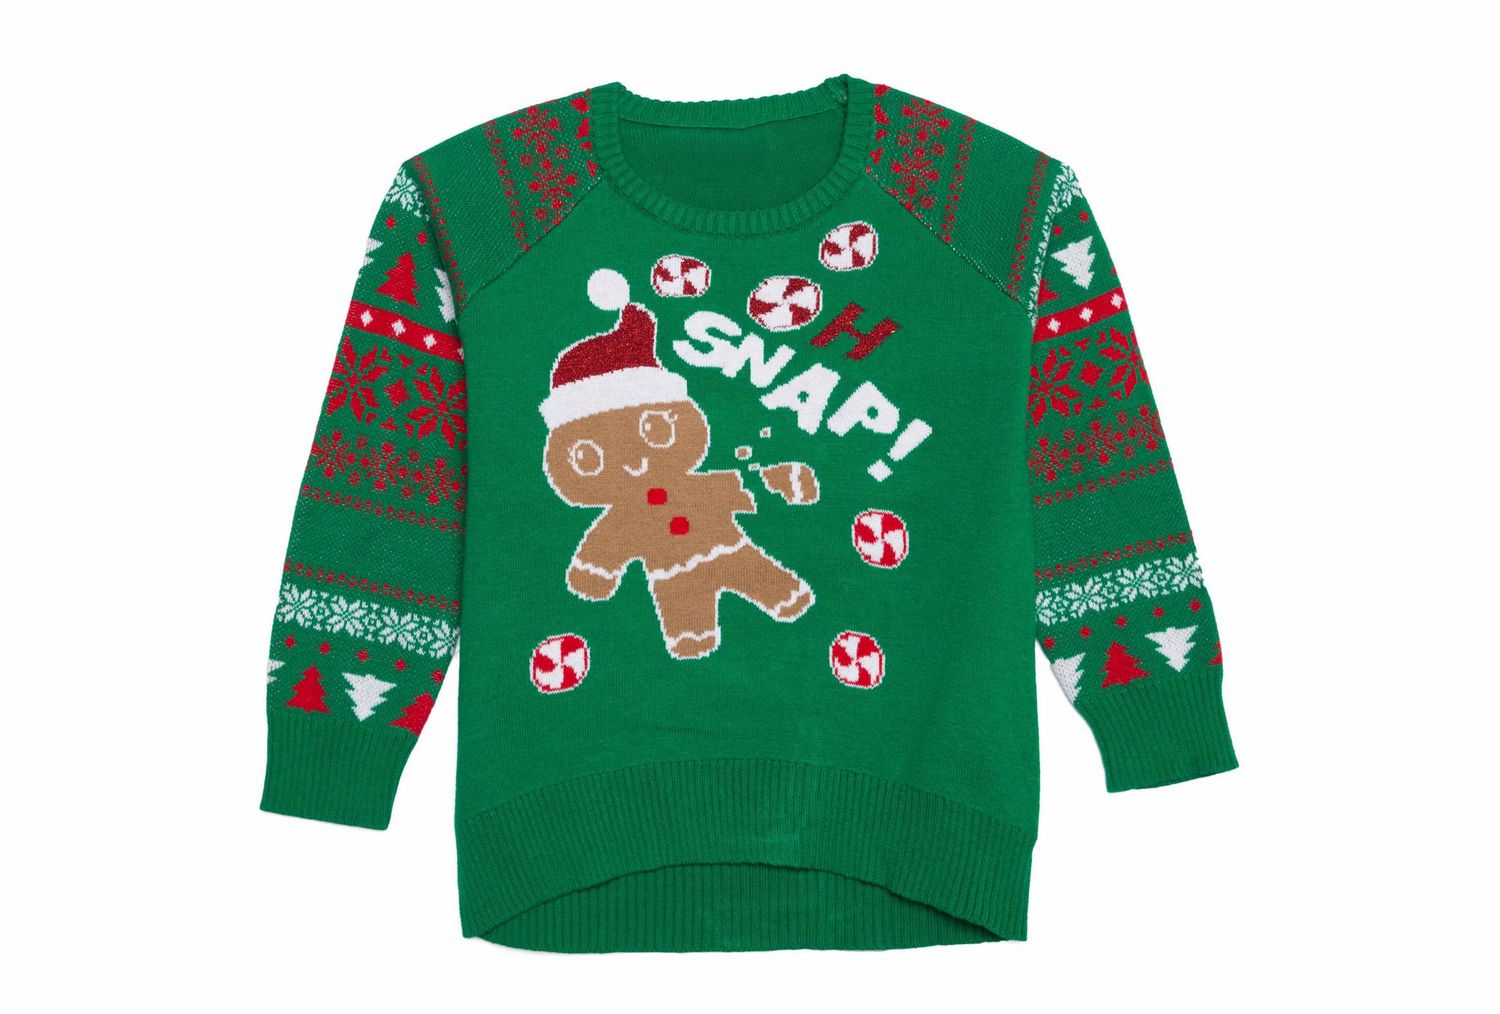 Ugly baby christmas sweaters: Festive Fun for Little Ones缩略图